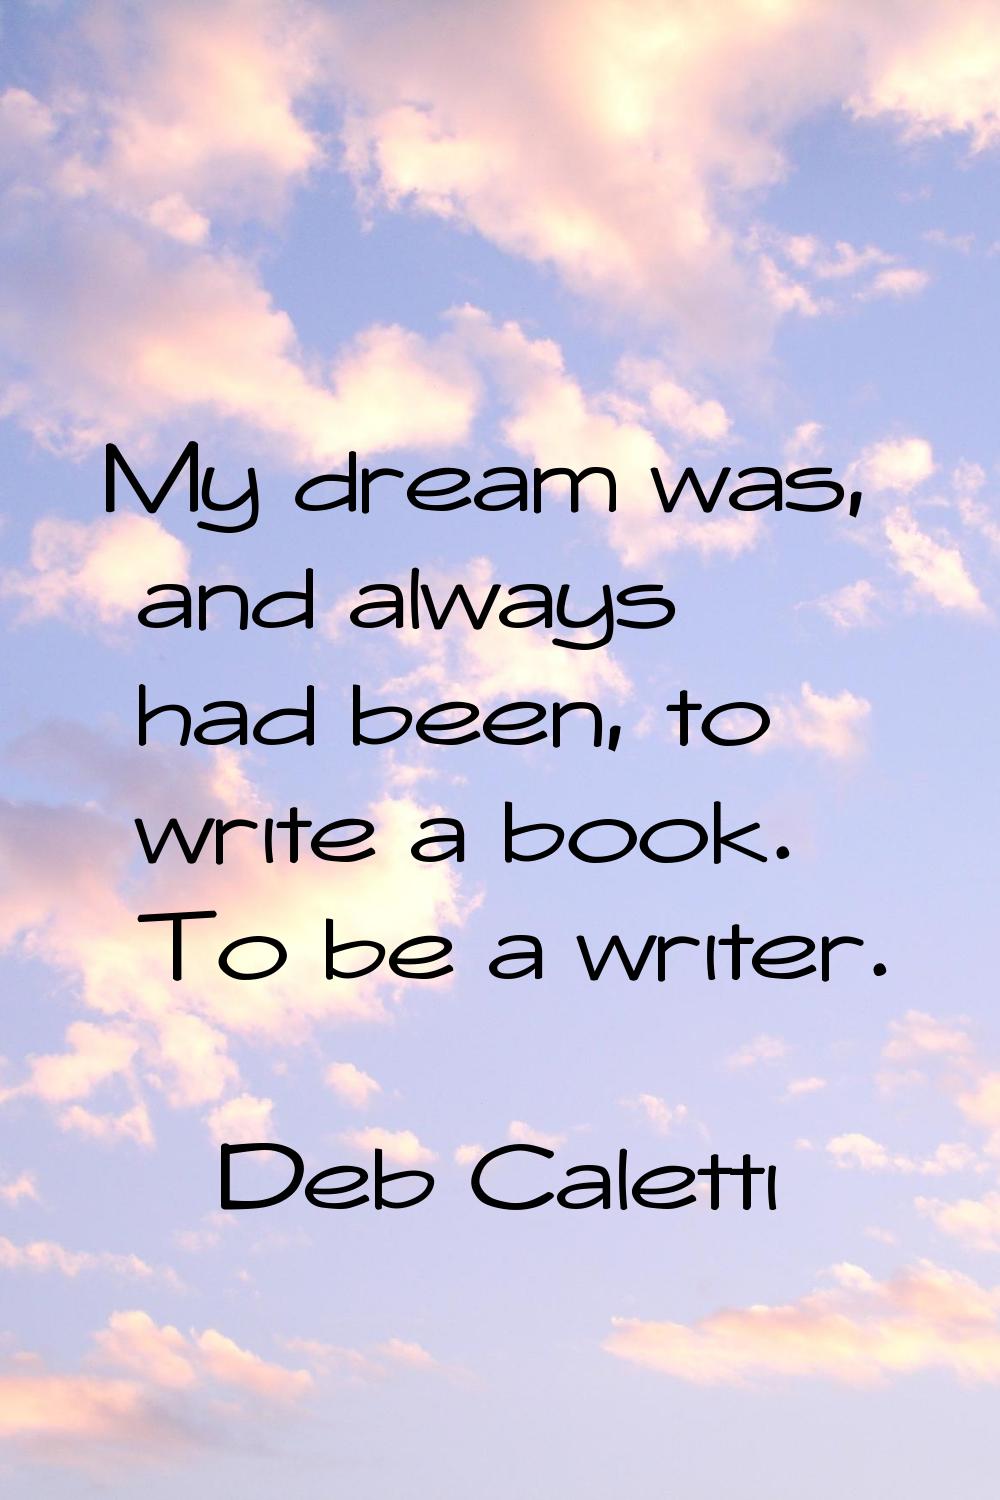 My dream was, and always had been, to write a book. To be a writer.